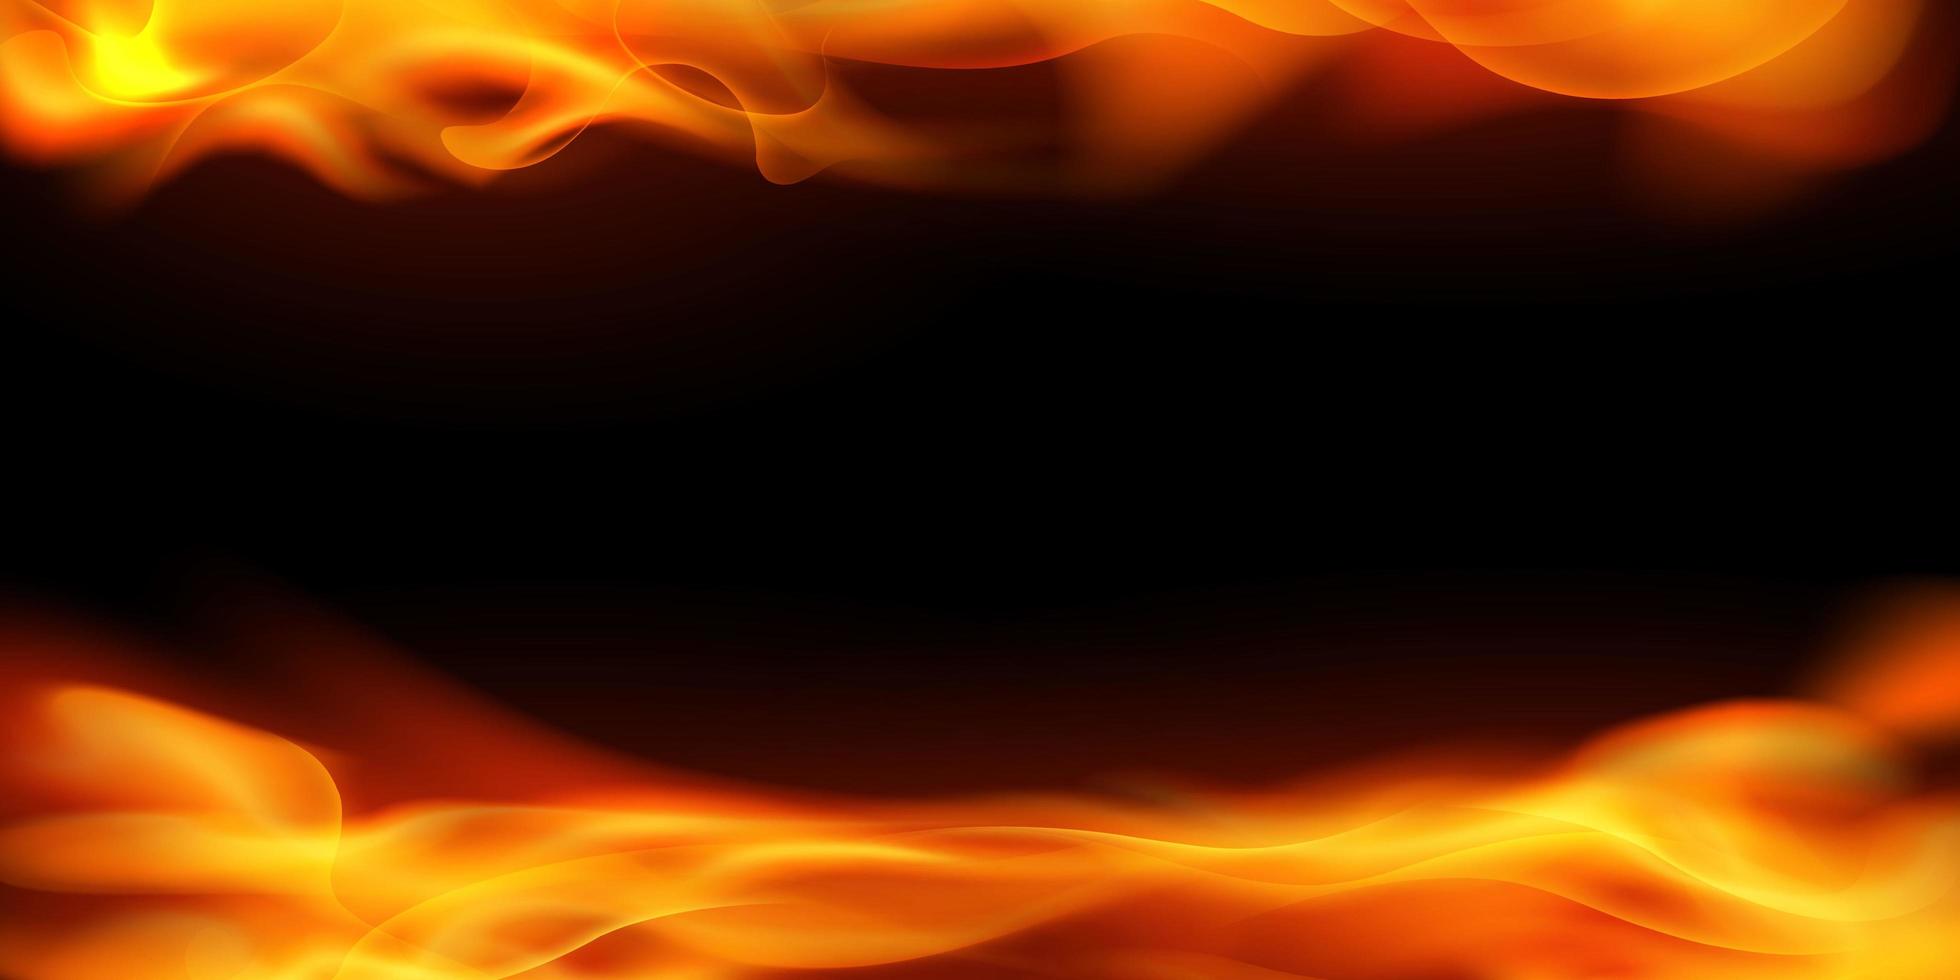 Effect burning red hot sparks realistic fire flames abstract background vector